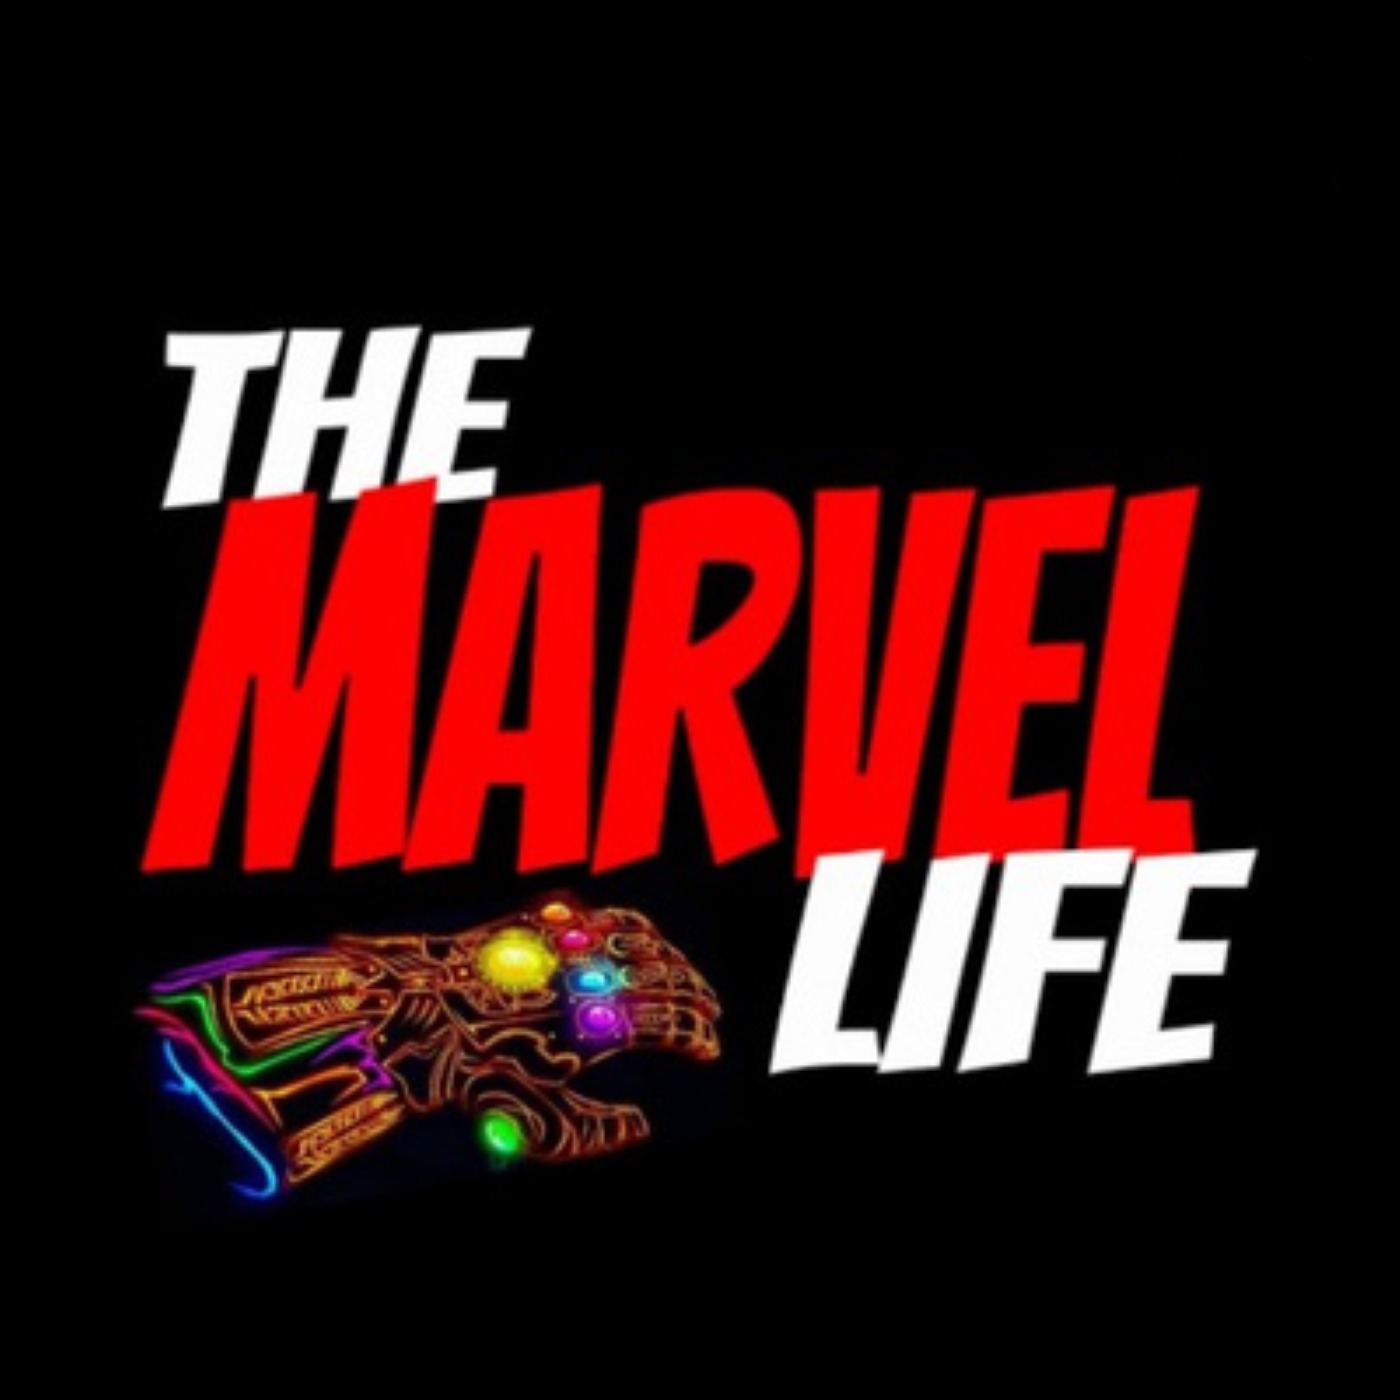 Episode 116: The Marvel Life